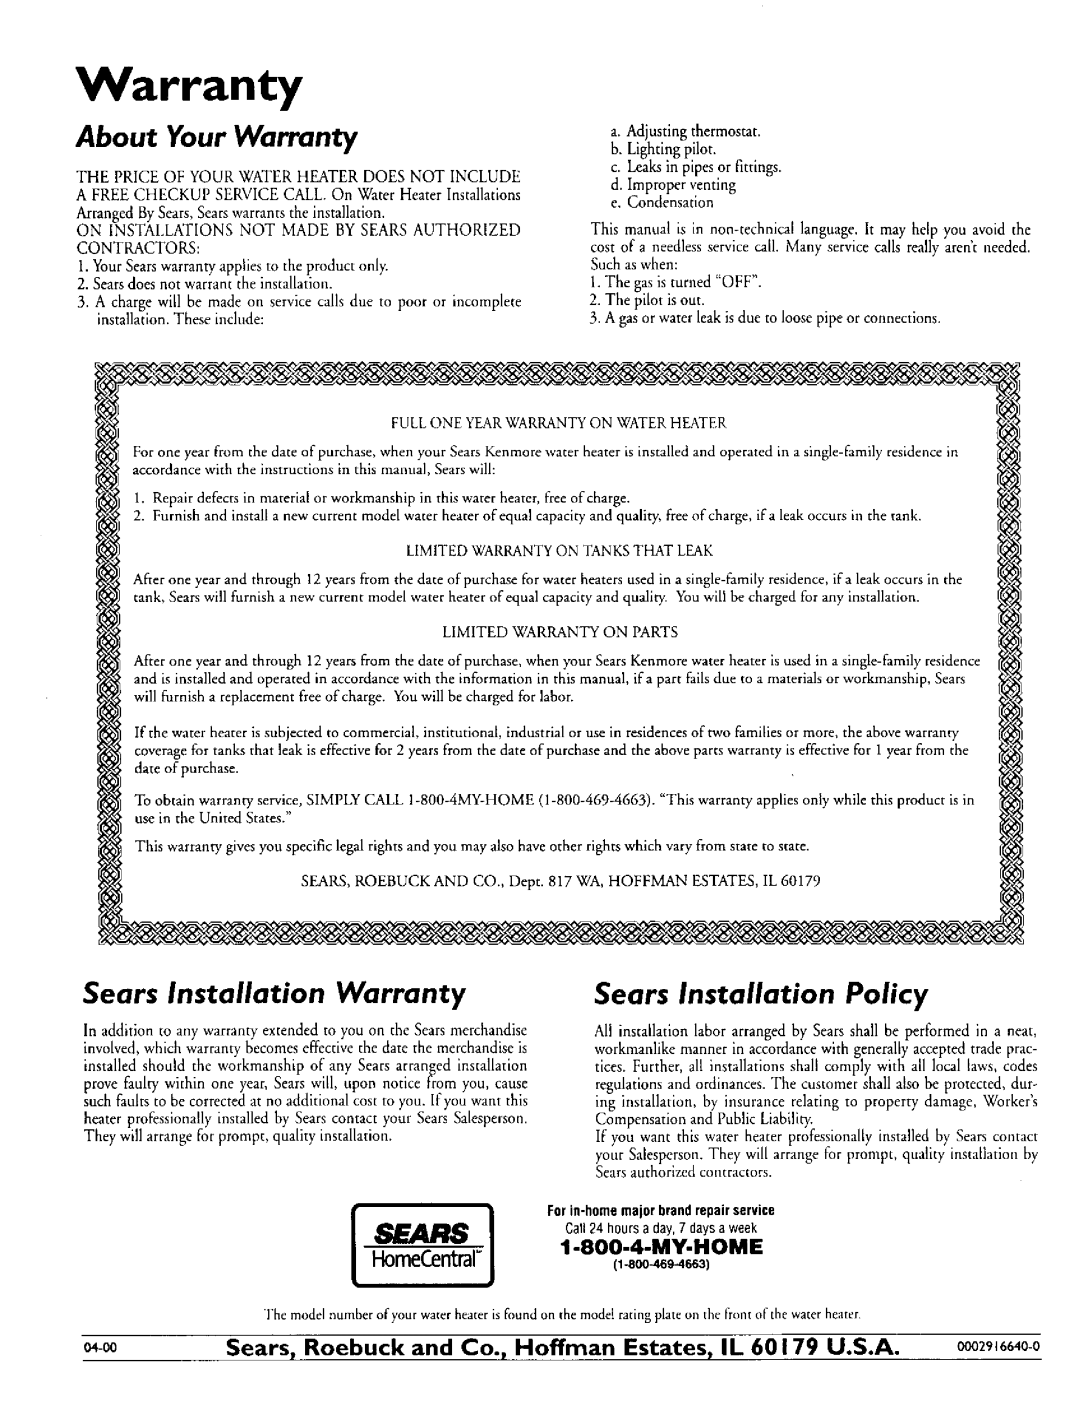 Kenmore 153.330402, 153.330502, 153.330752 About Your Warranty, Sears Installation Warranty, Sears Installation Policy 